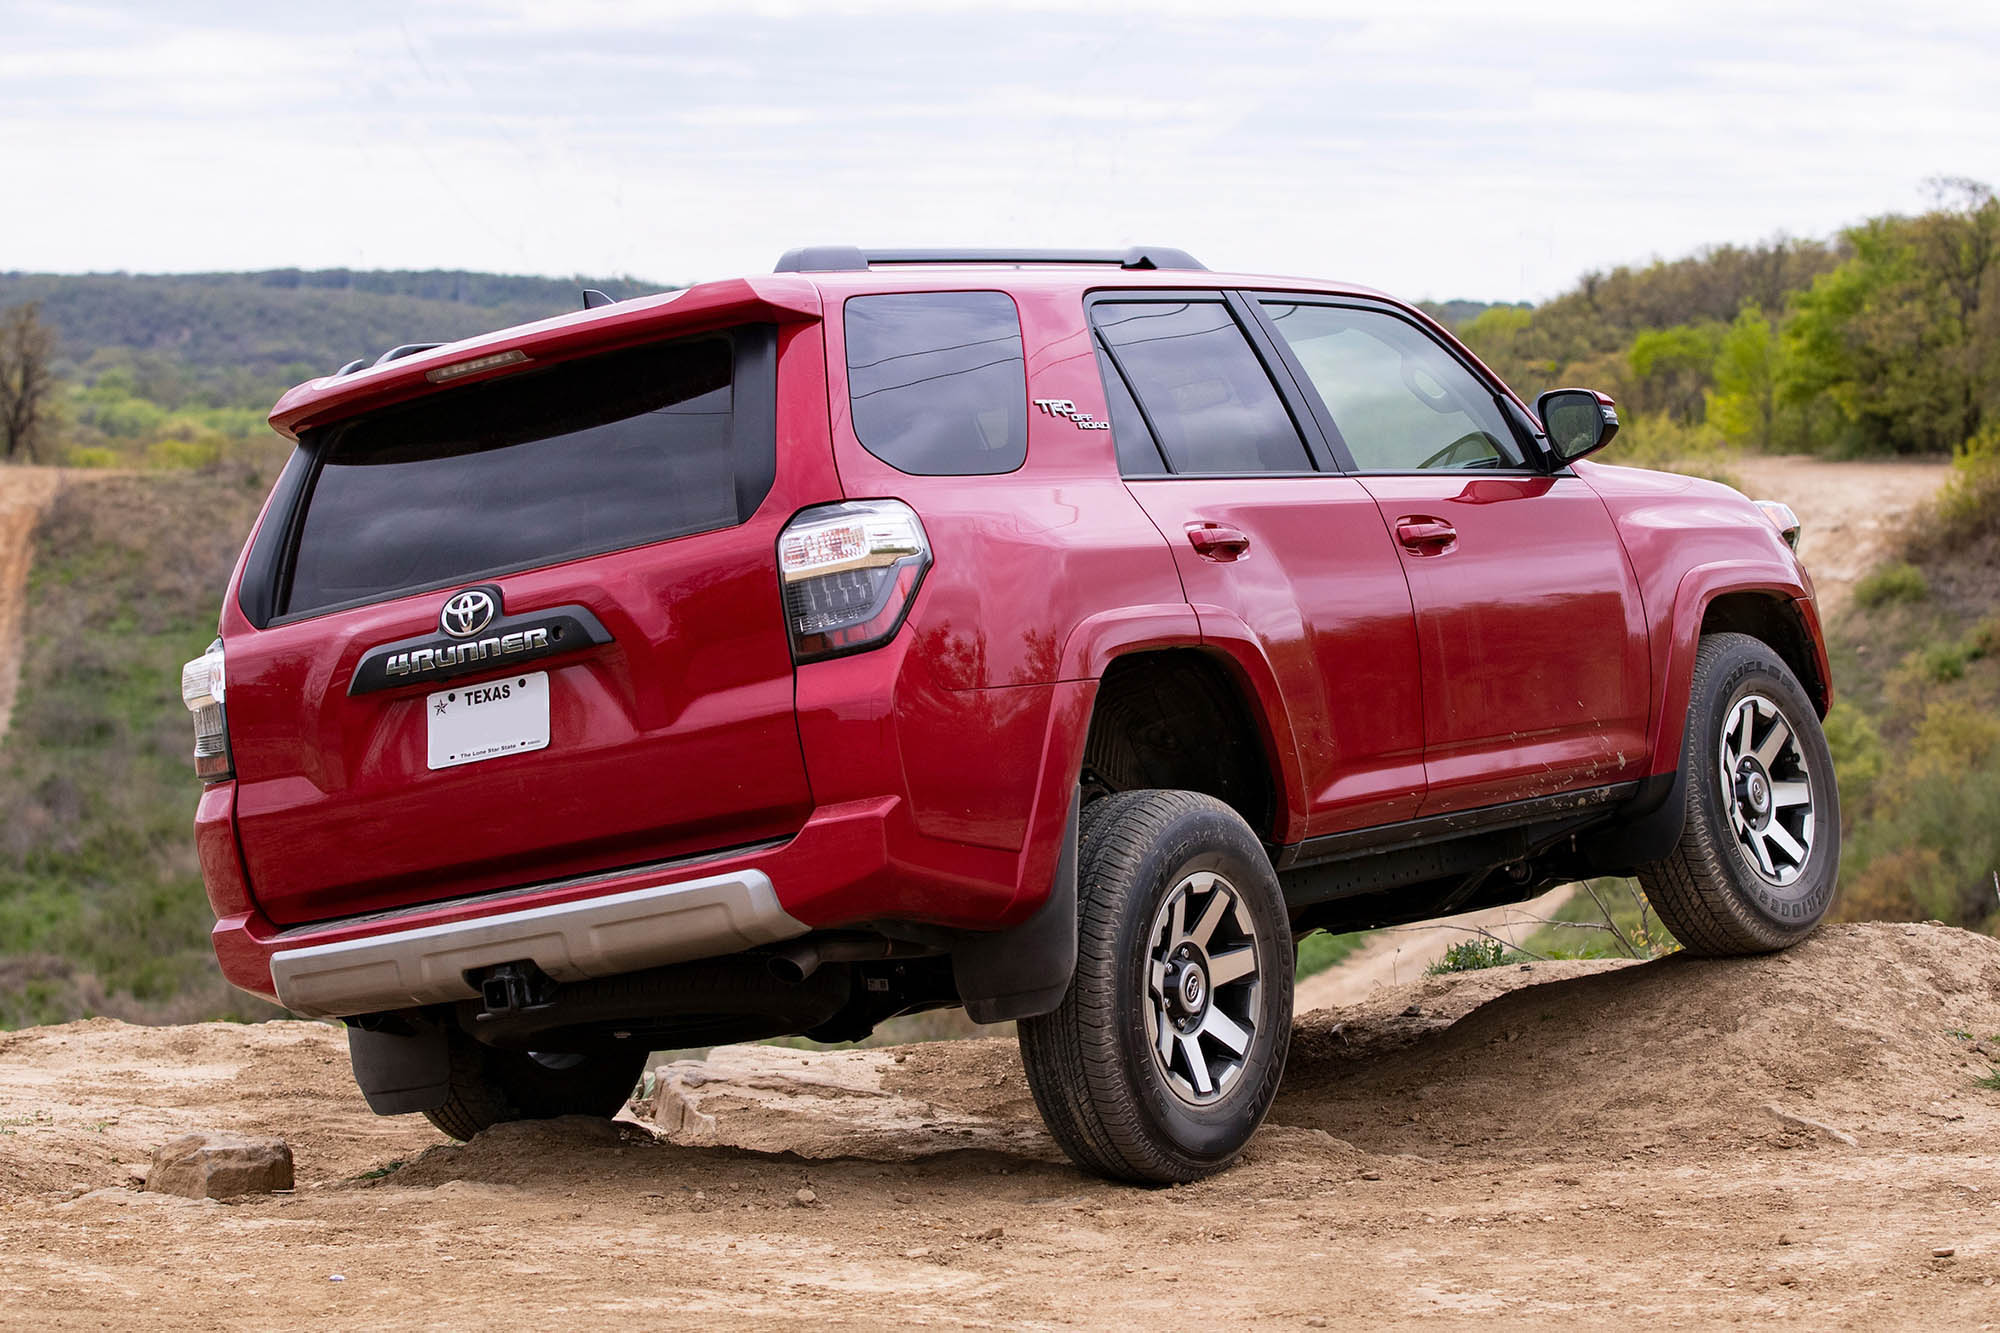 Right rear view of a red Toyota 4Runner showing suspension articulation